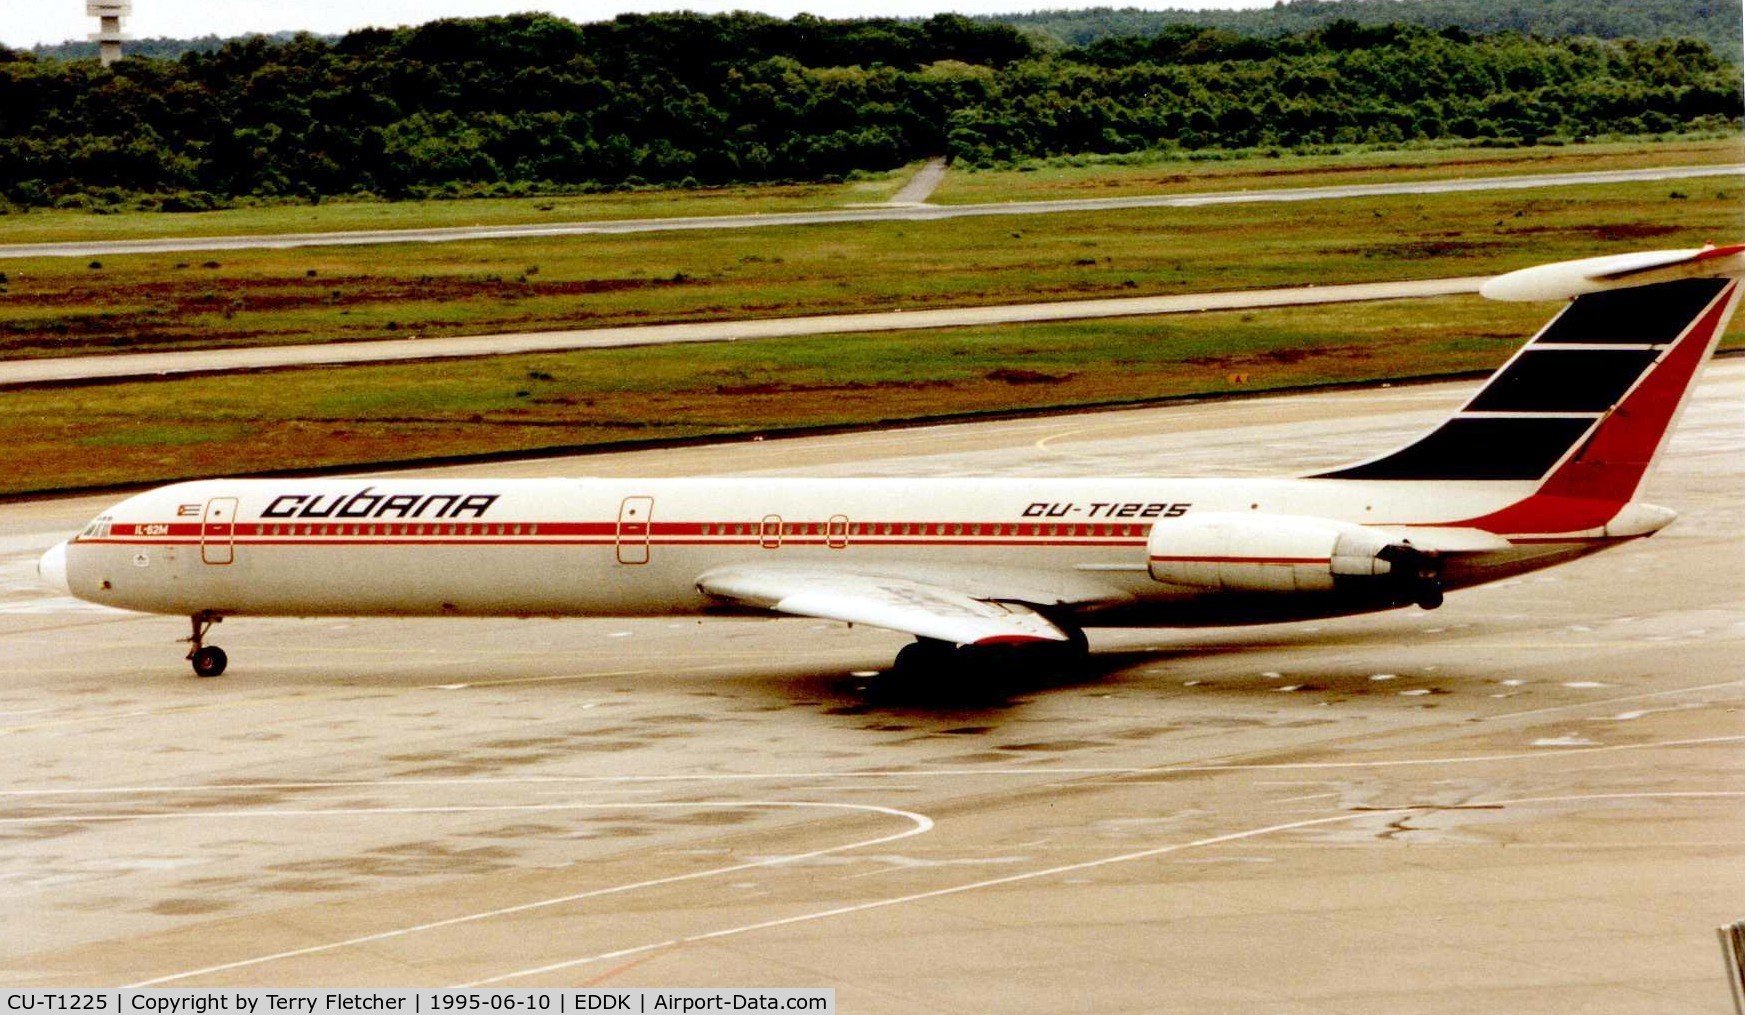 CU-T1225, 1981 Ilyushin Il-62M C/N 39845, Cubana taxying for departure from Cologne , Germany in 1995